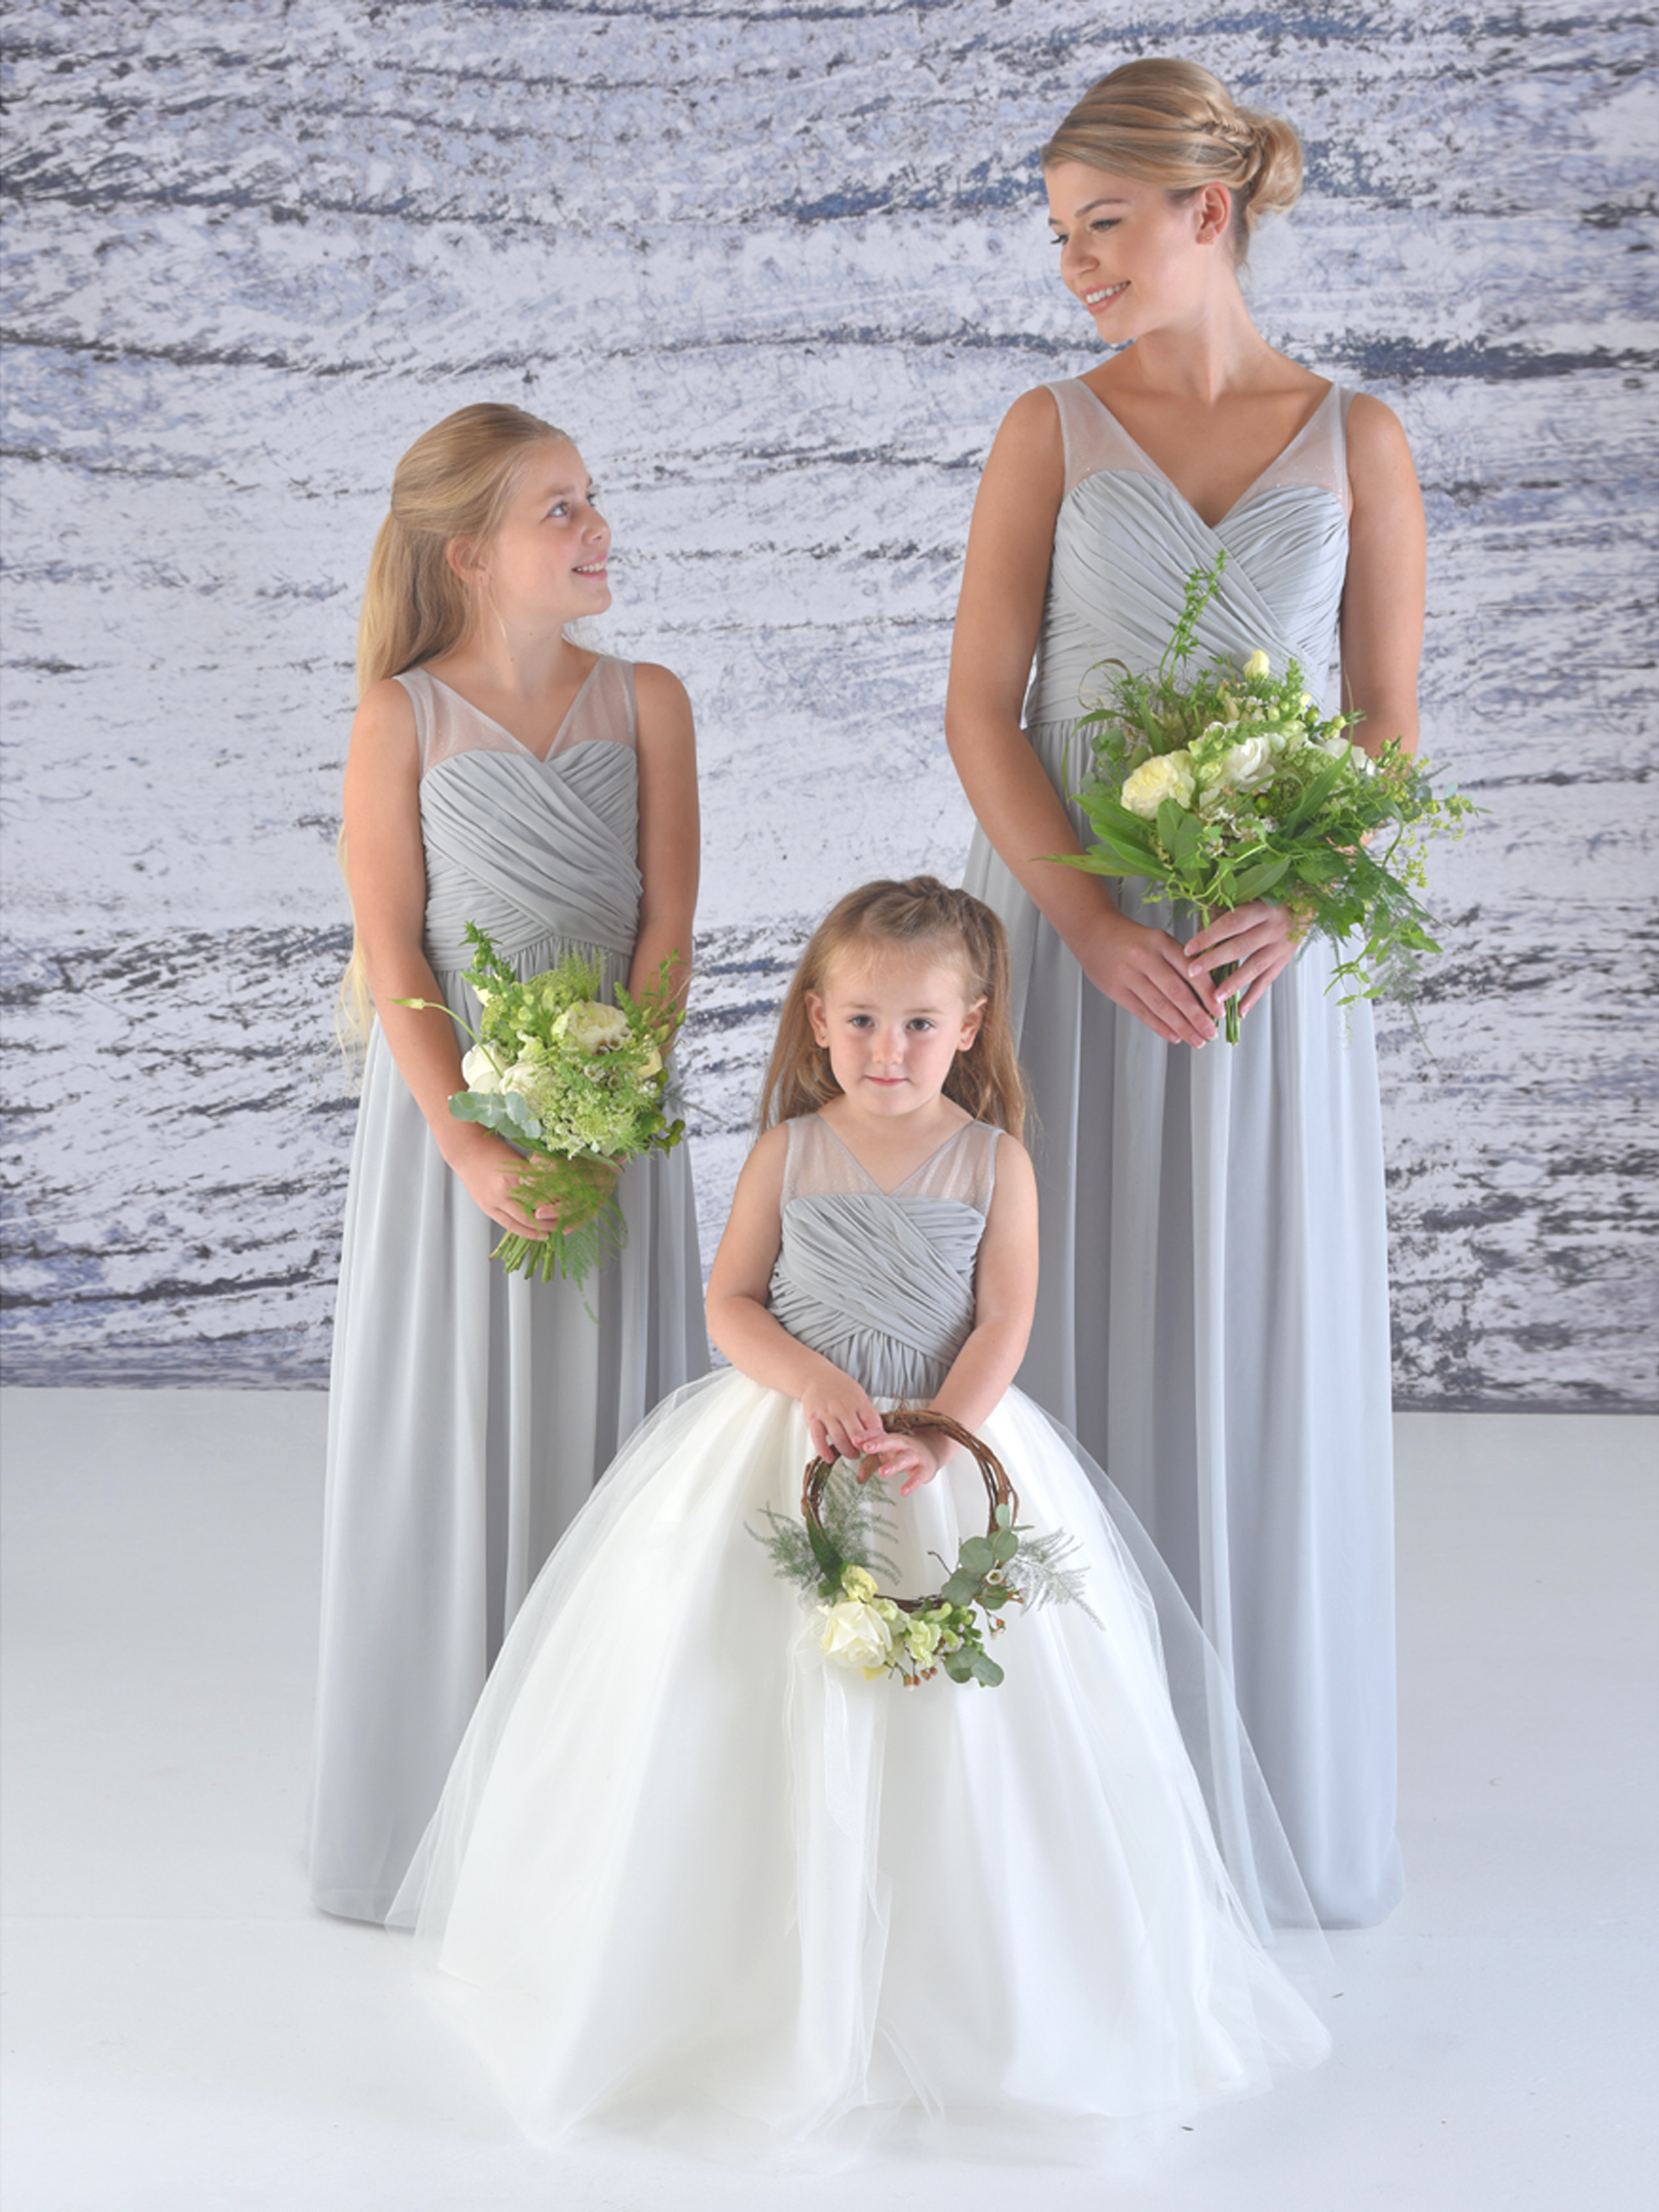 bridesmaid and flower girl dresses matching